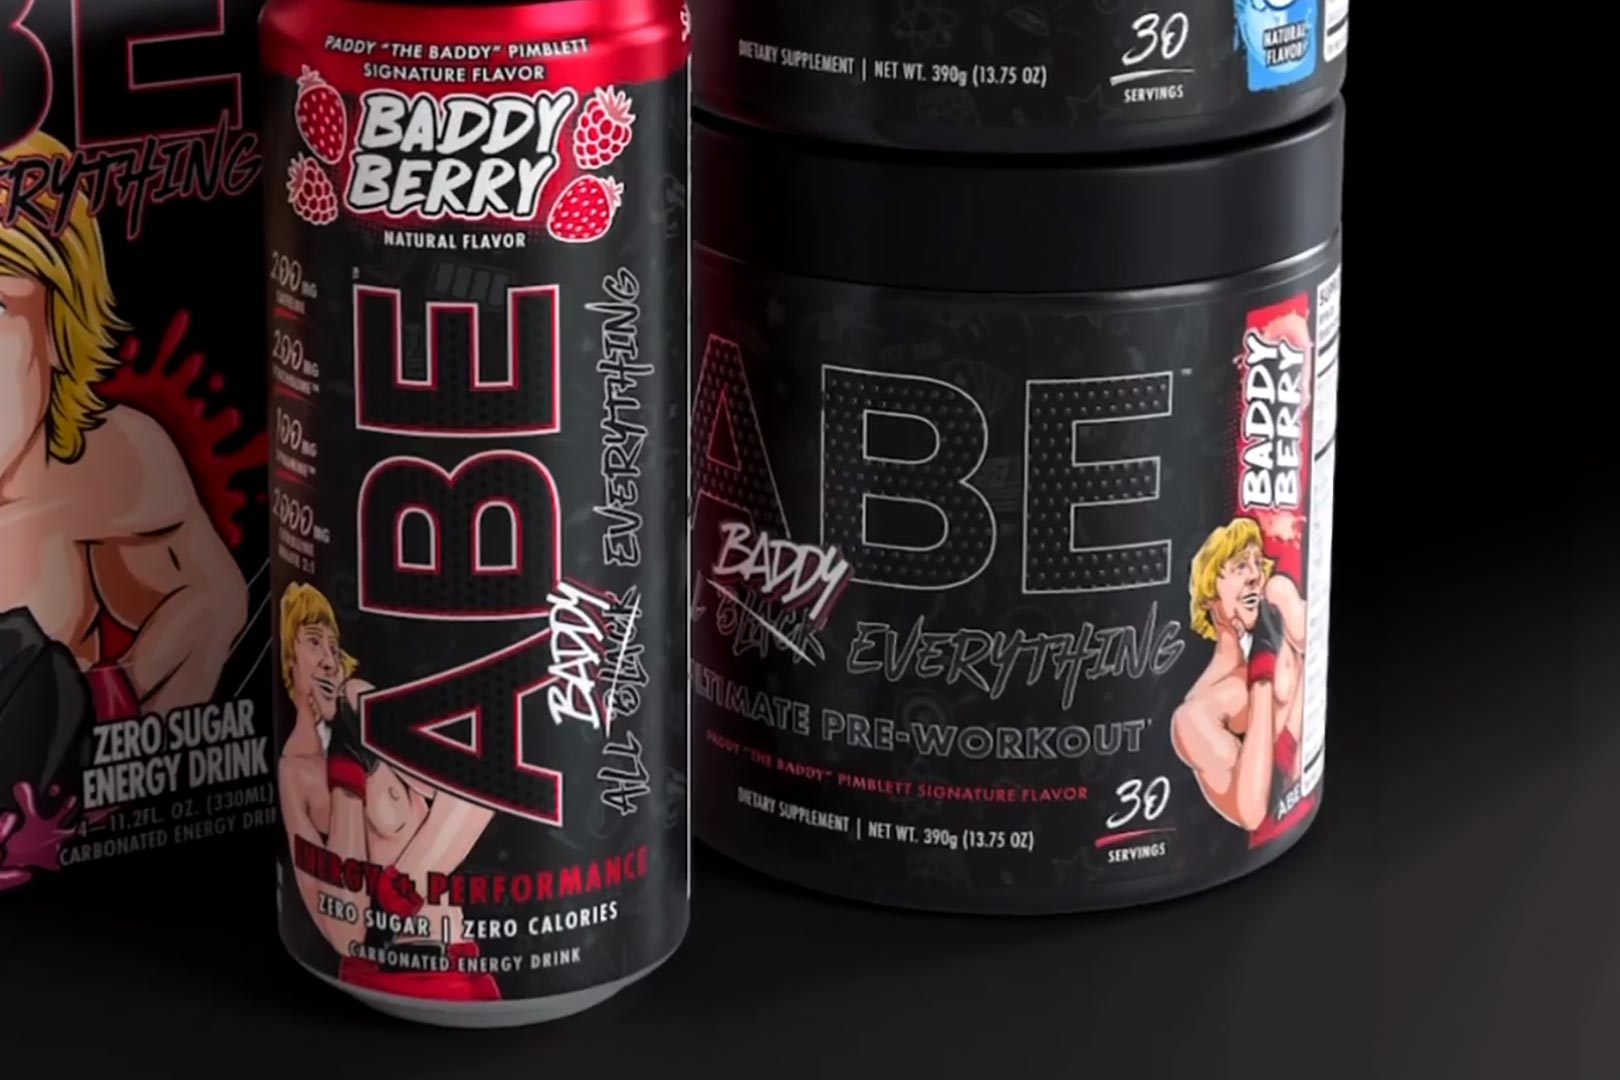 Applied Nutrition Launching Abe At Walmart